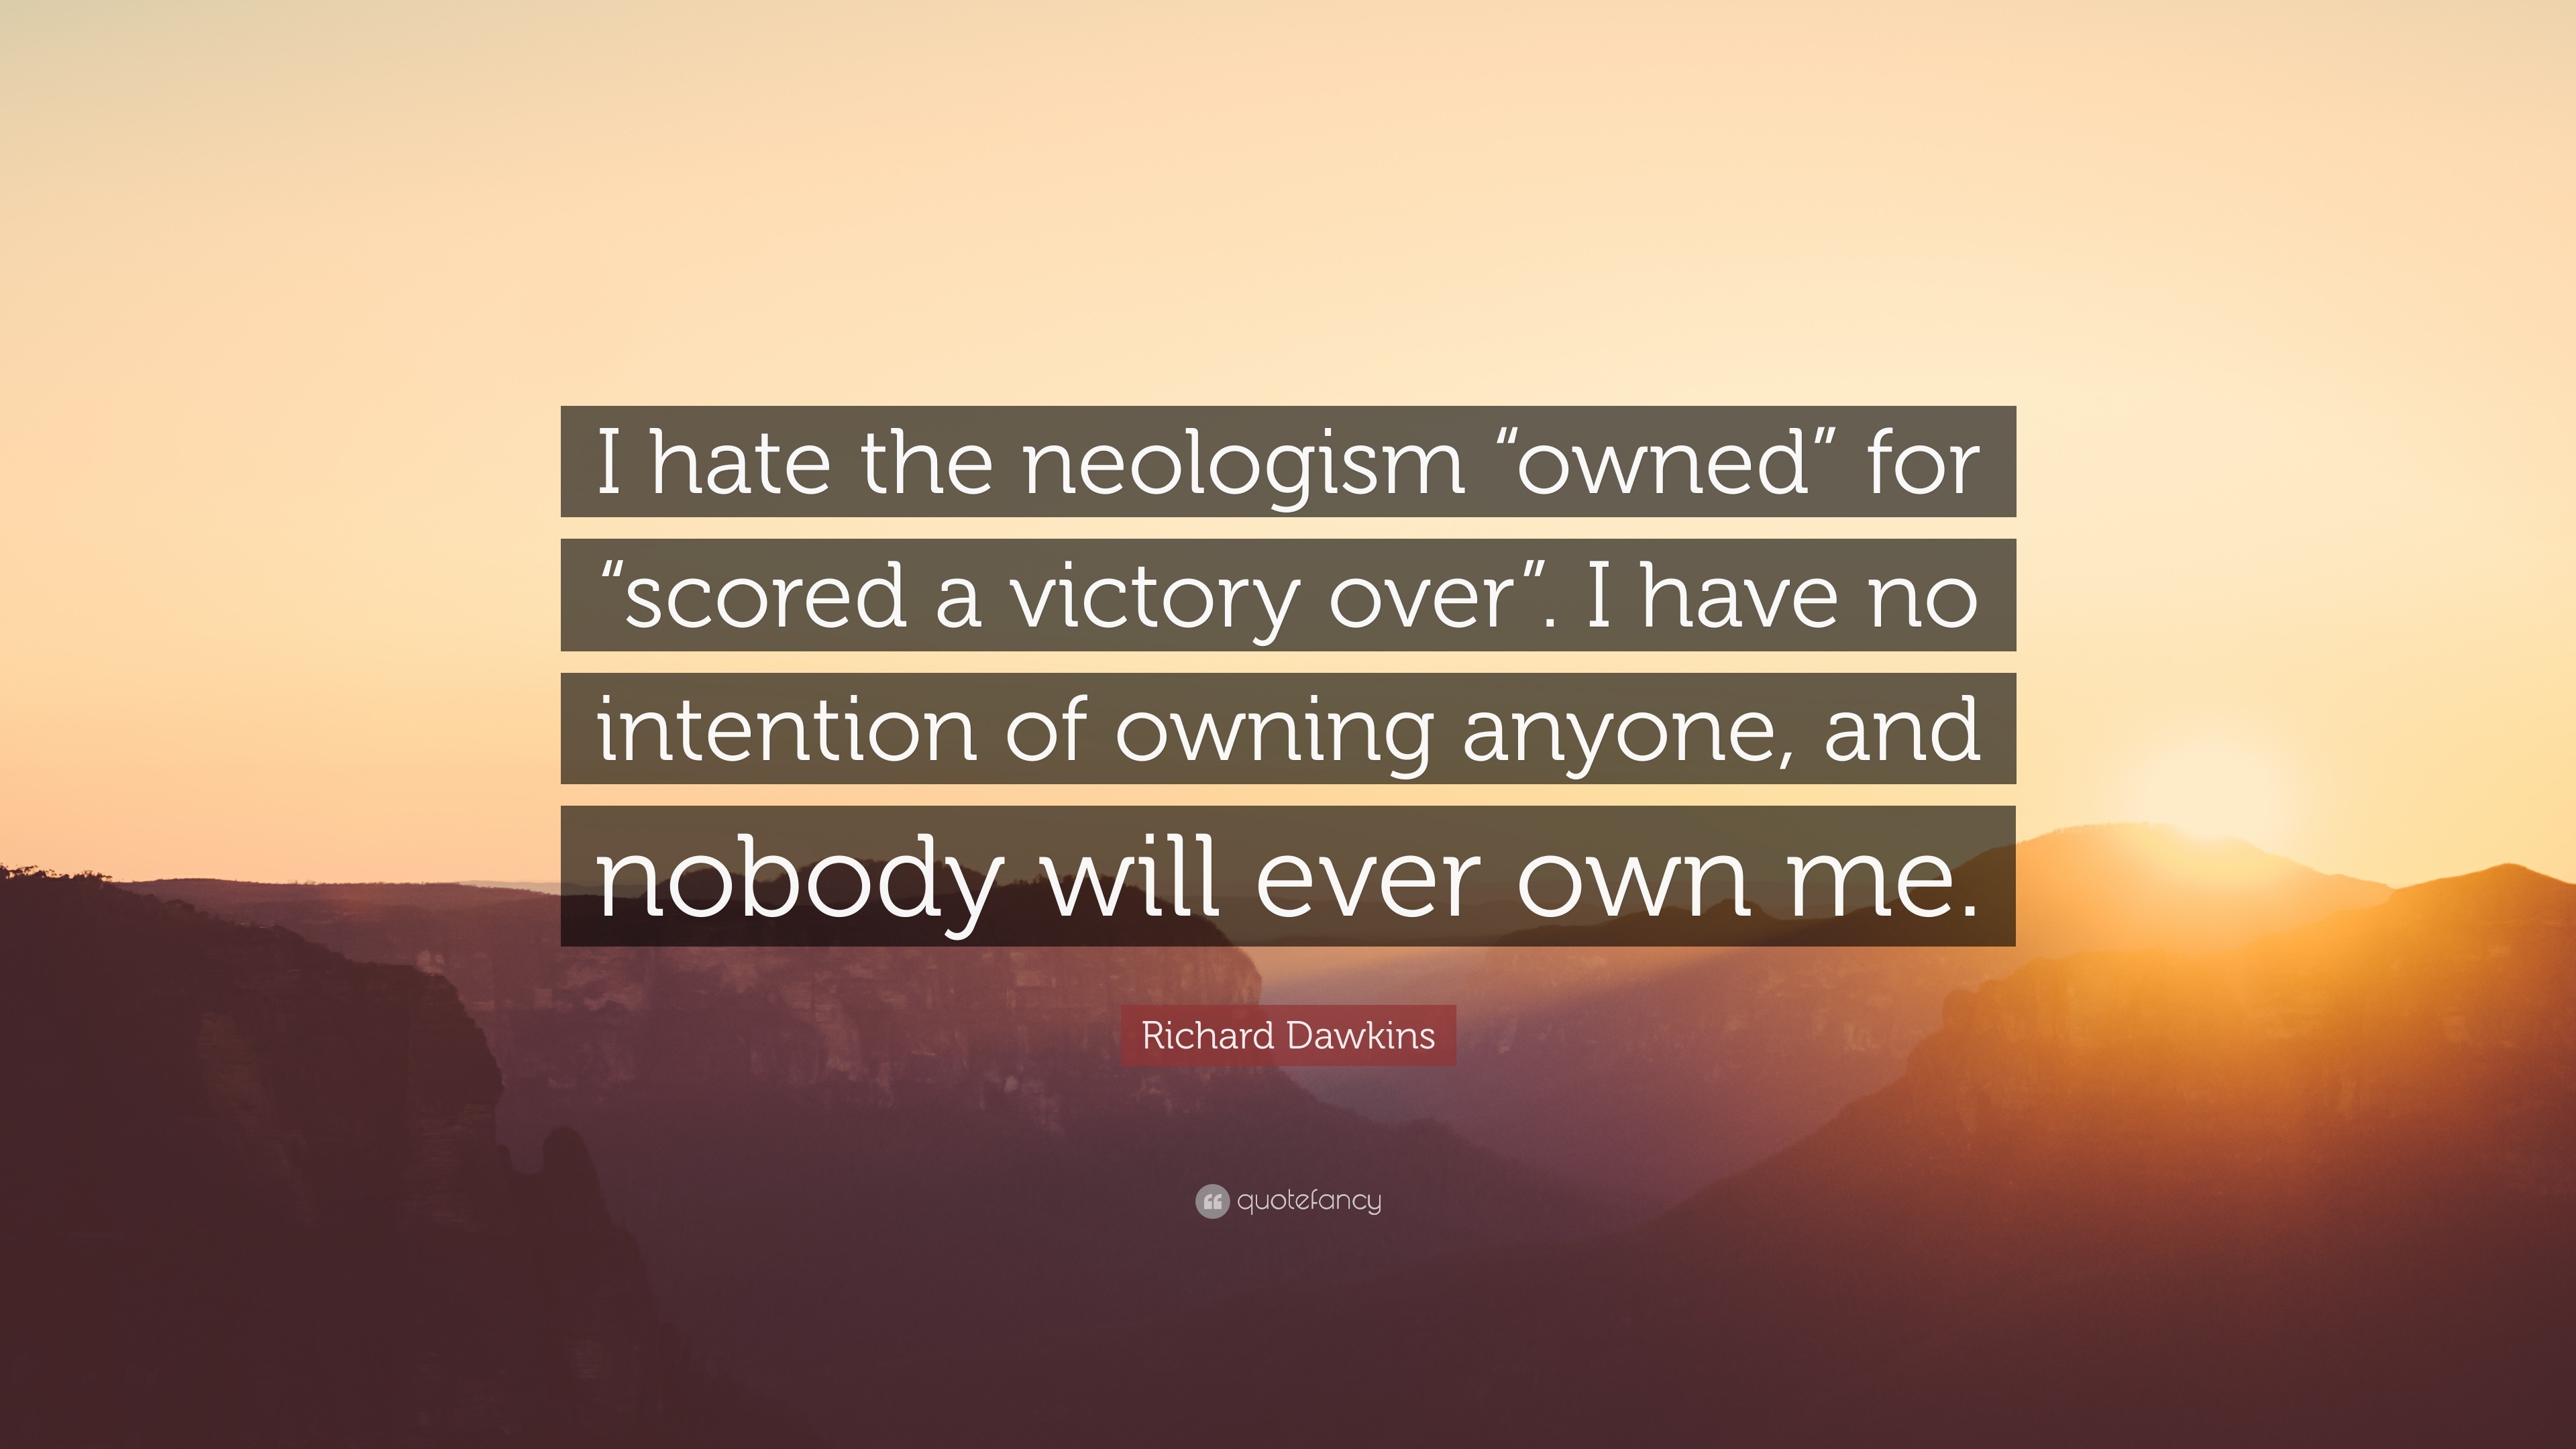 richard dawkins quote: "i hate the neologism "owned" for "scored